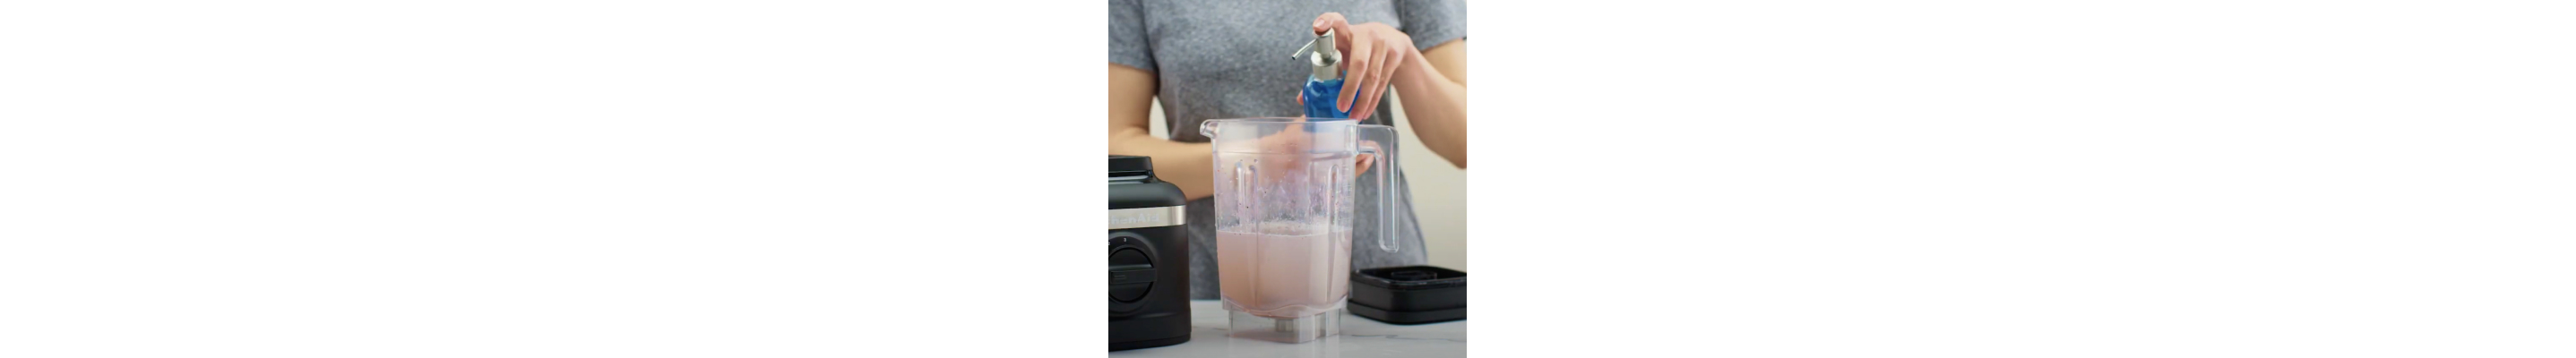 How to Clean a Blender in 6 Quick Steps